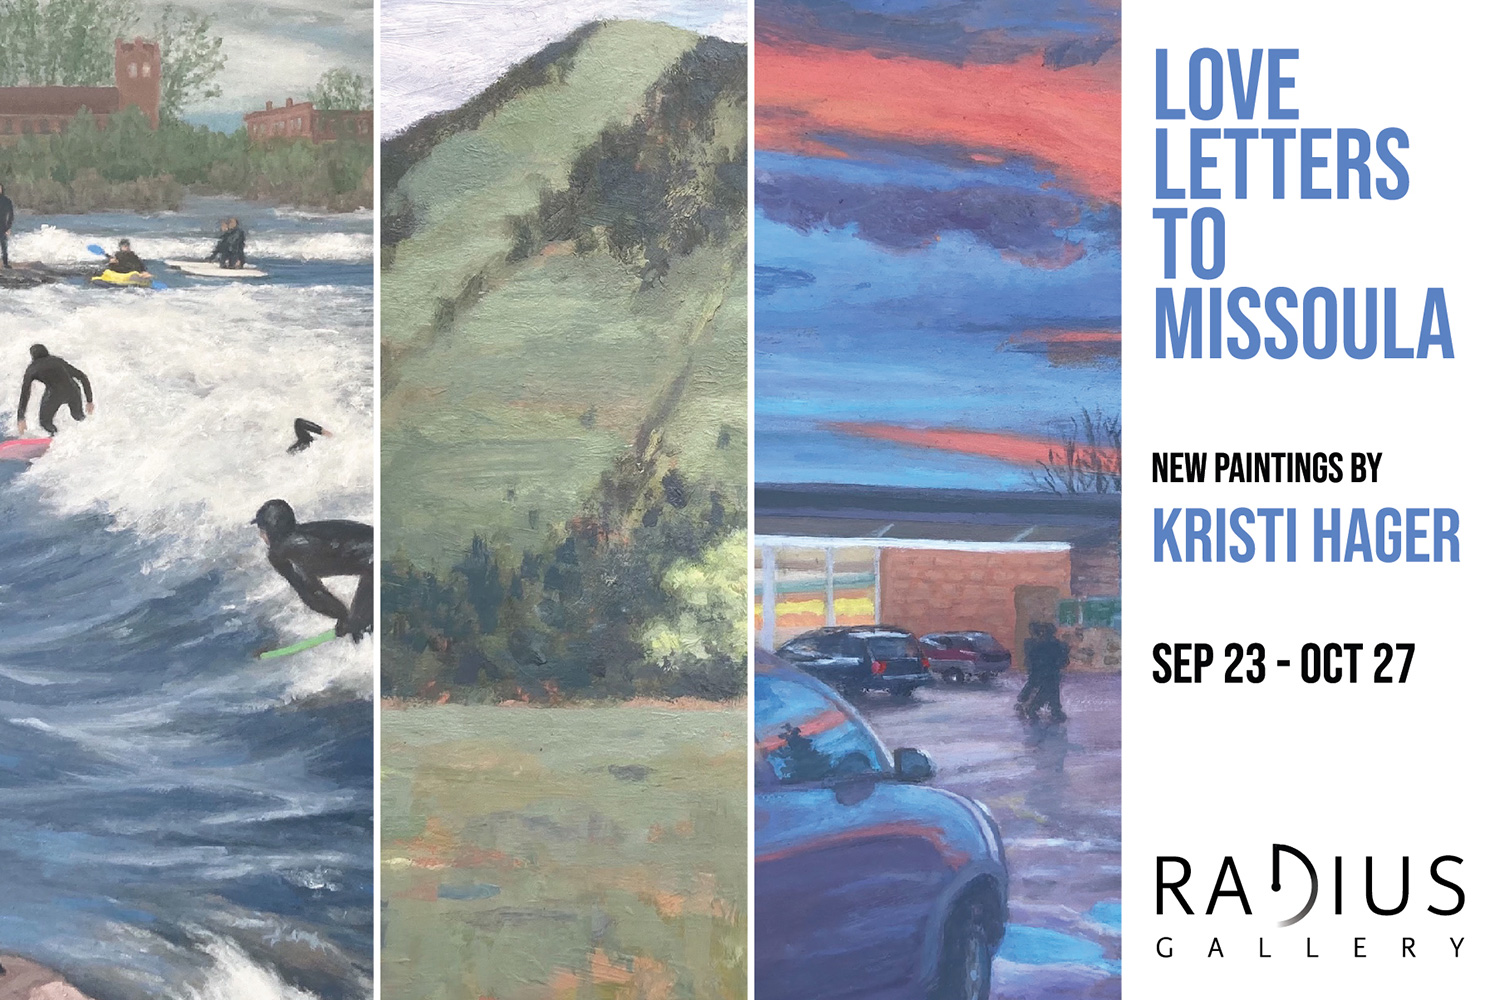 Opening Art Exhibit "Love Letters to Missoula" by Kristi Hager at Radius Gallery in Downtown Missoula on Friday, September 23, 2022